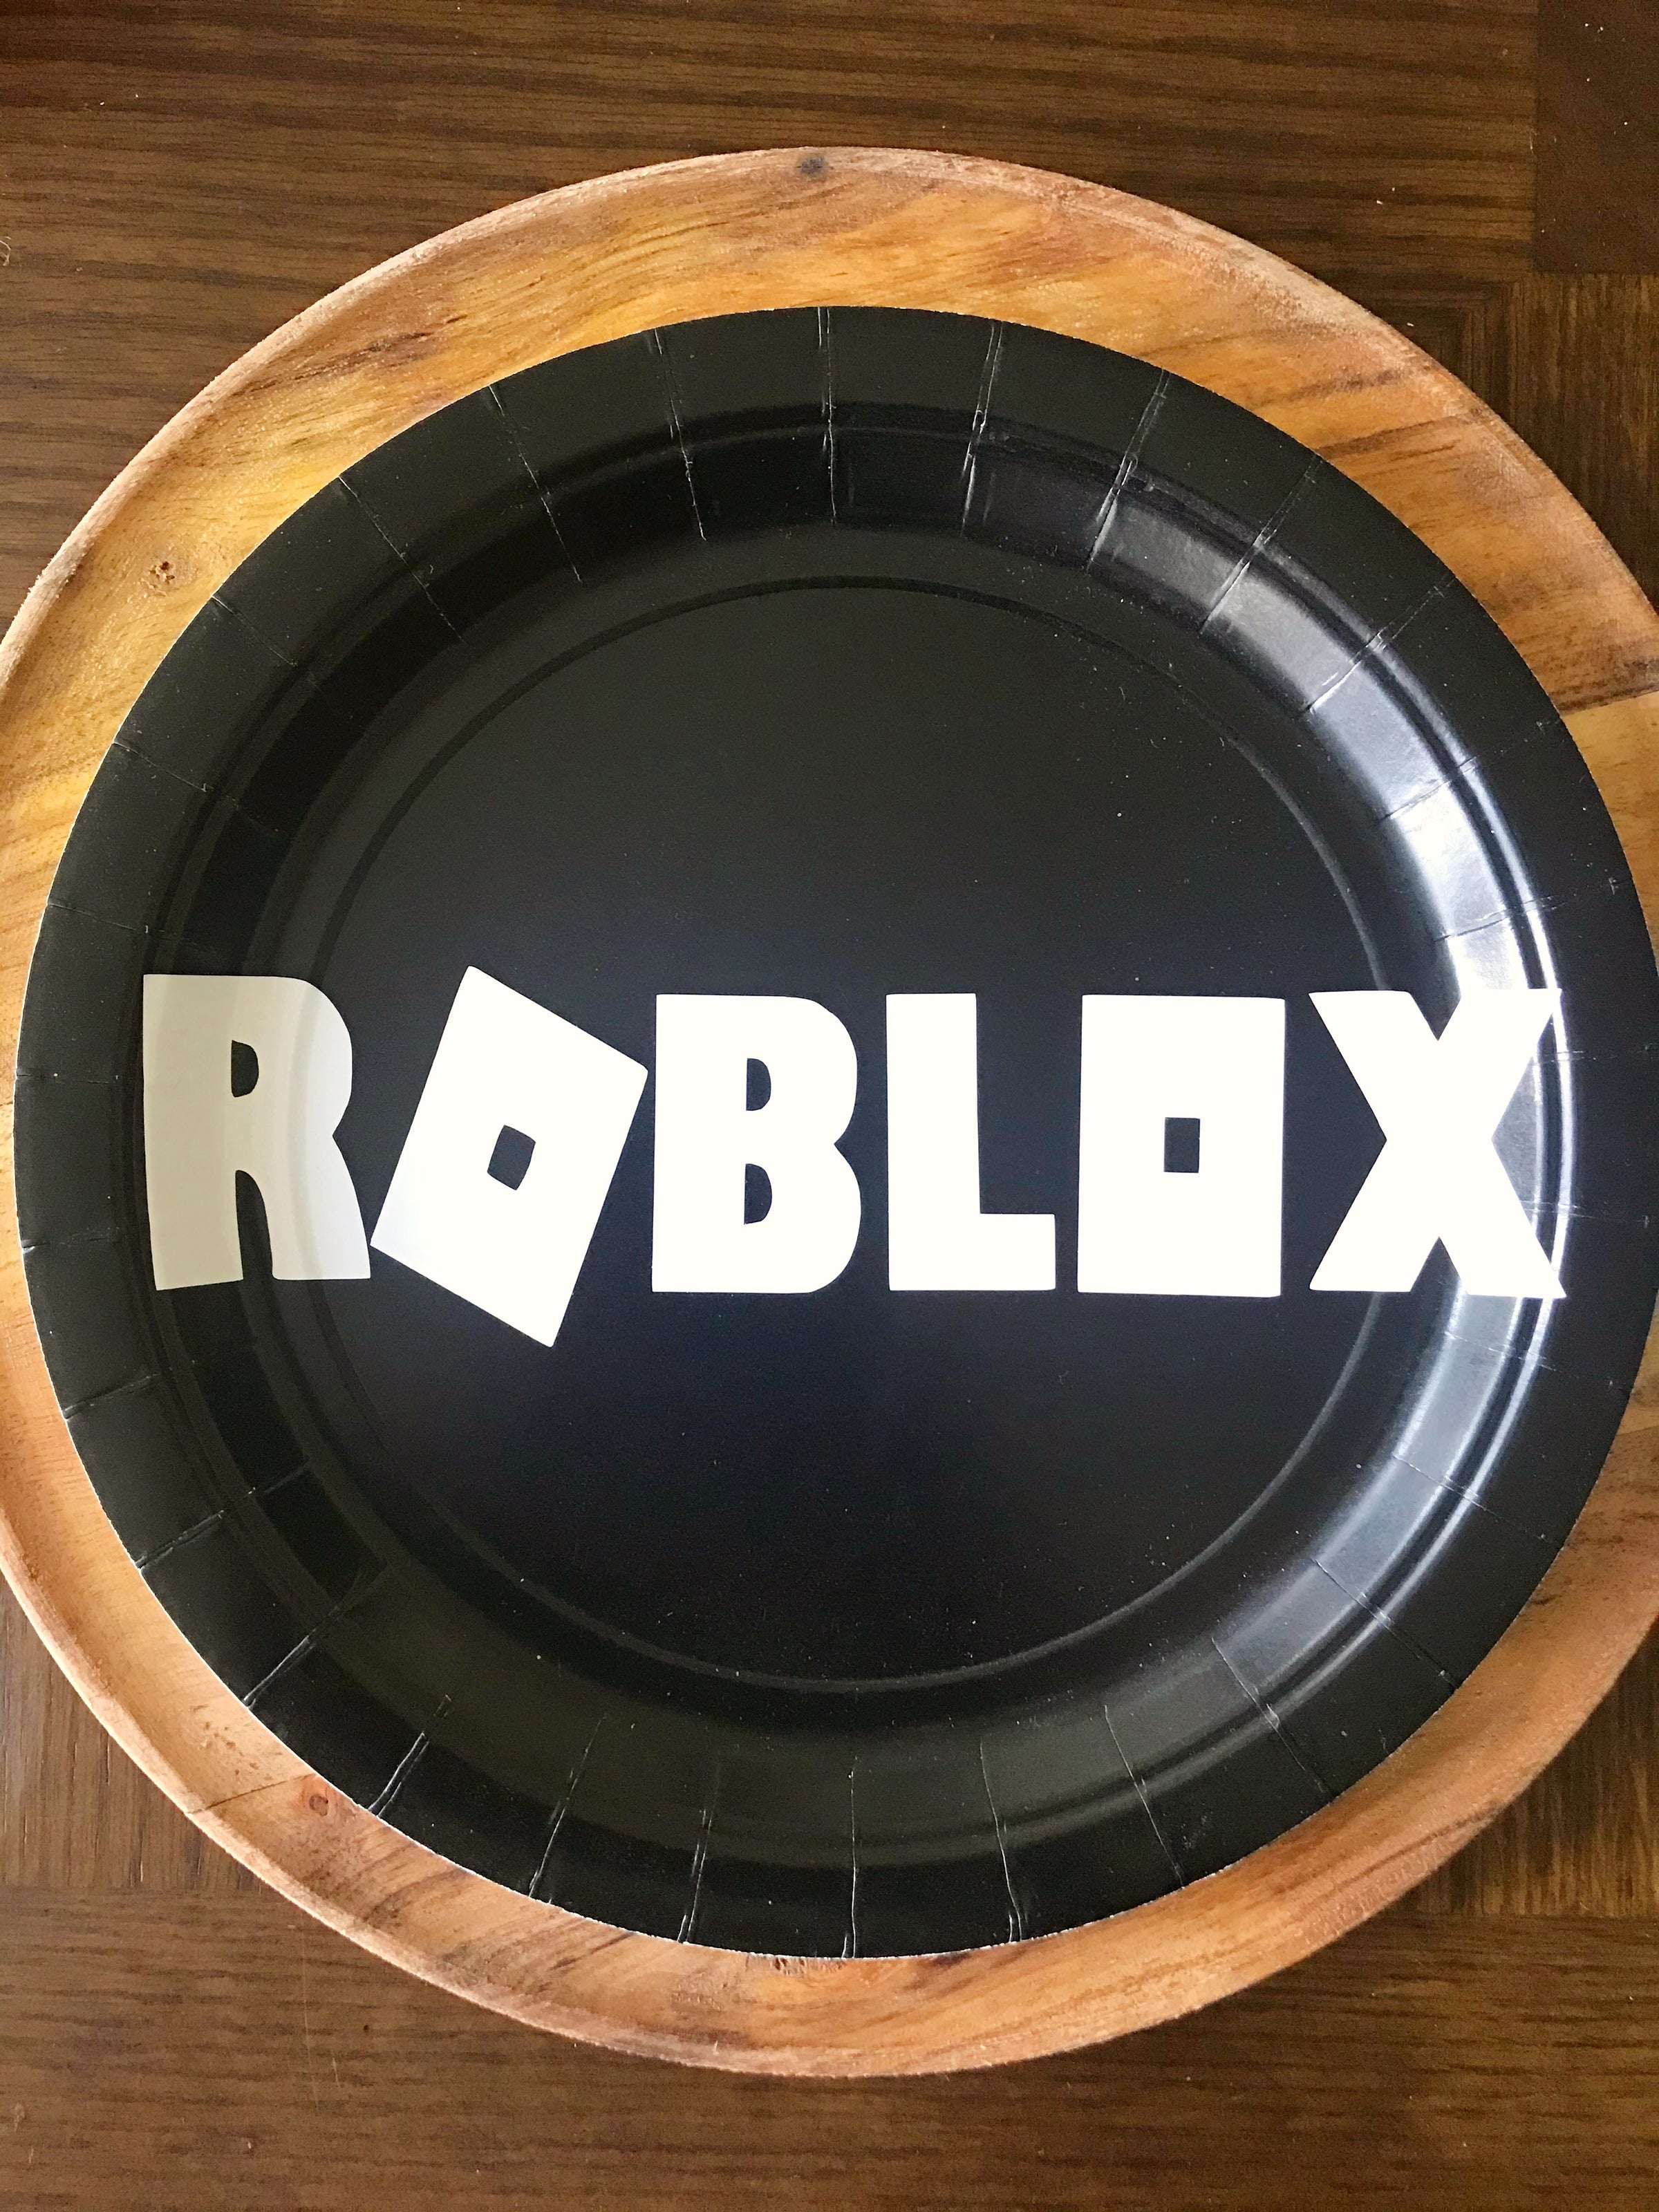 Roblox Products Price List in Pakistan